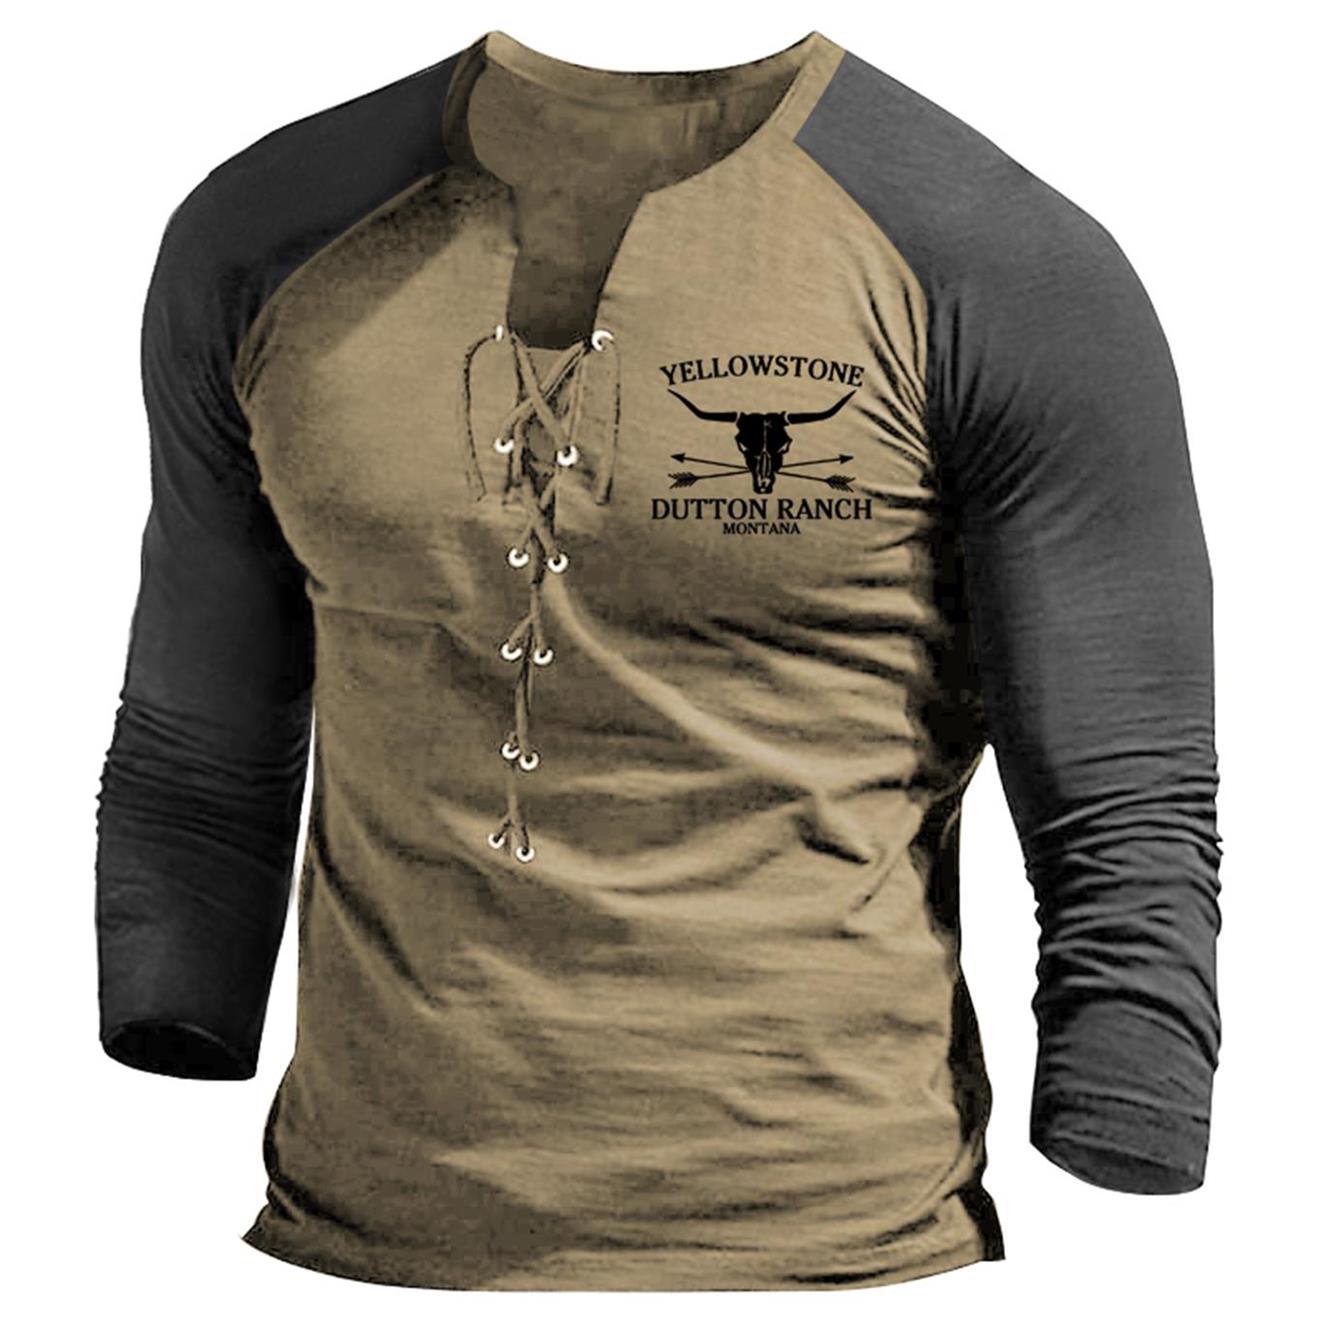 Men's Vintage Yellowstone Skull Chic Bull Colorblock Lace-up T-shirt